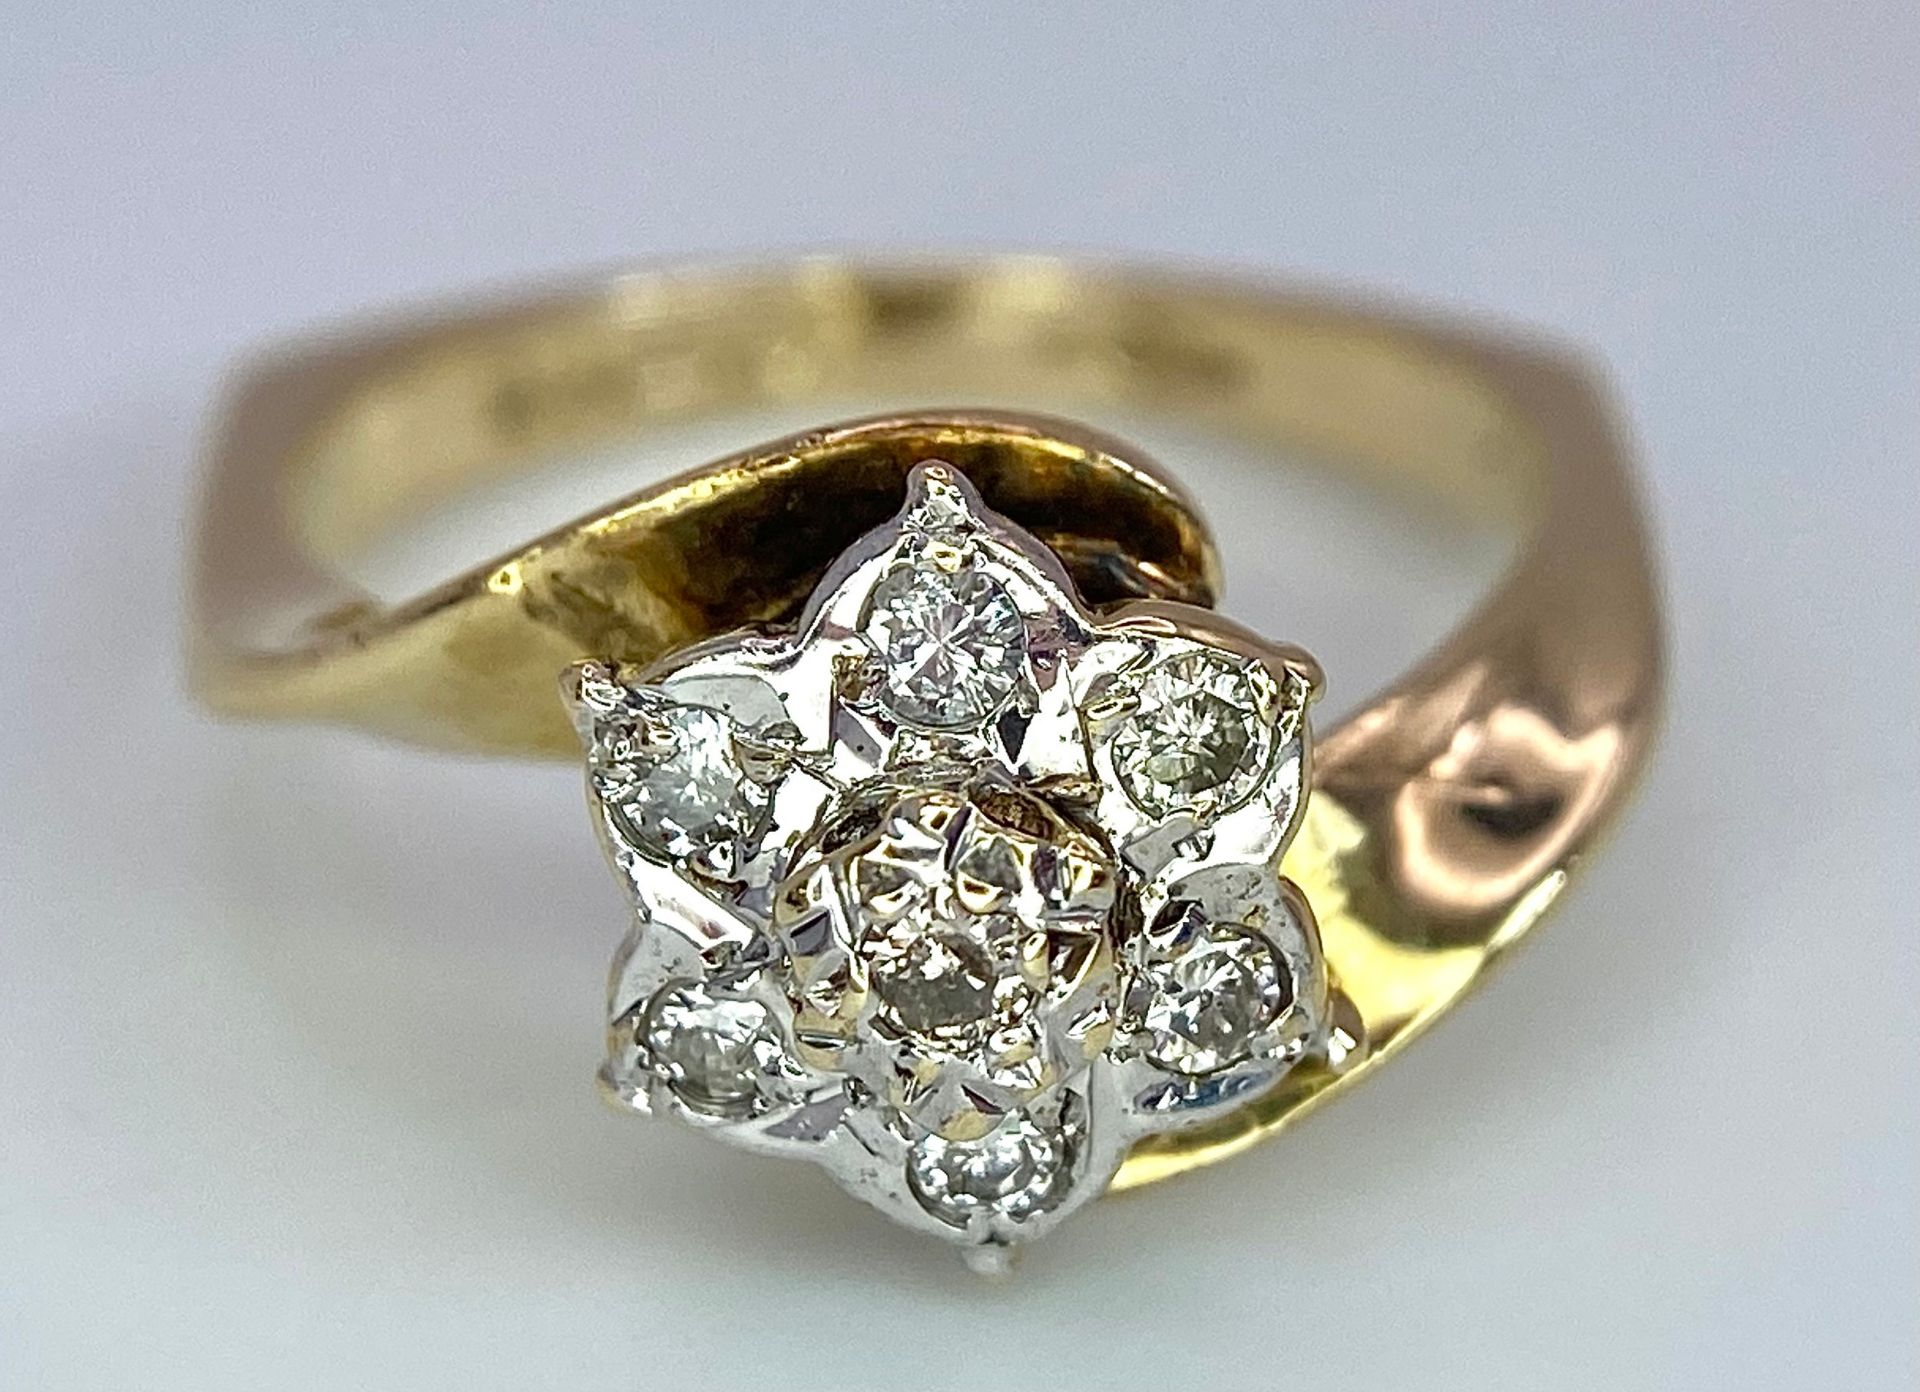 A 9K YELLOW GOLD DIAMOND FANCY VINTAGE CLUSTER RING. Size L, 2.7g total weight. Ref: SC 9008 - Image 4 of 7